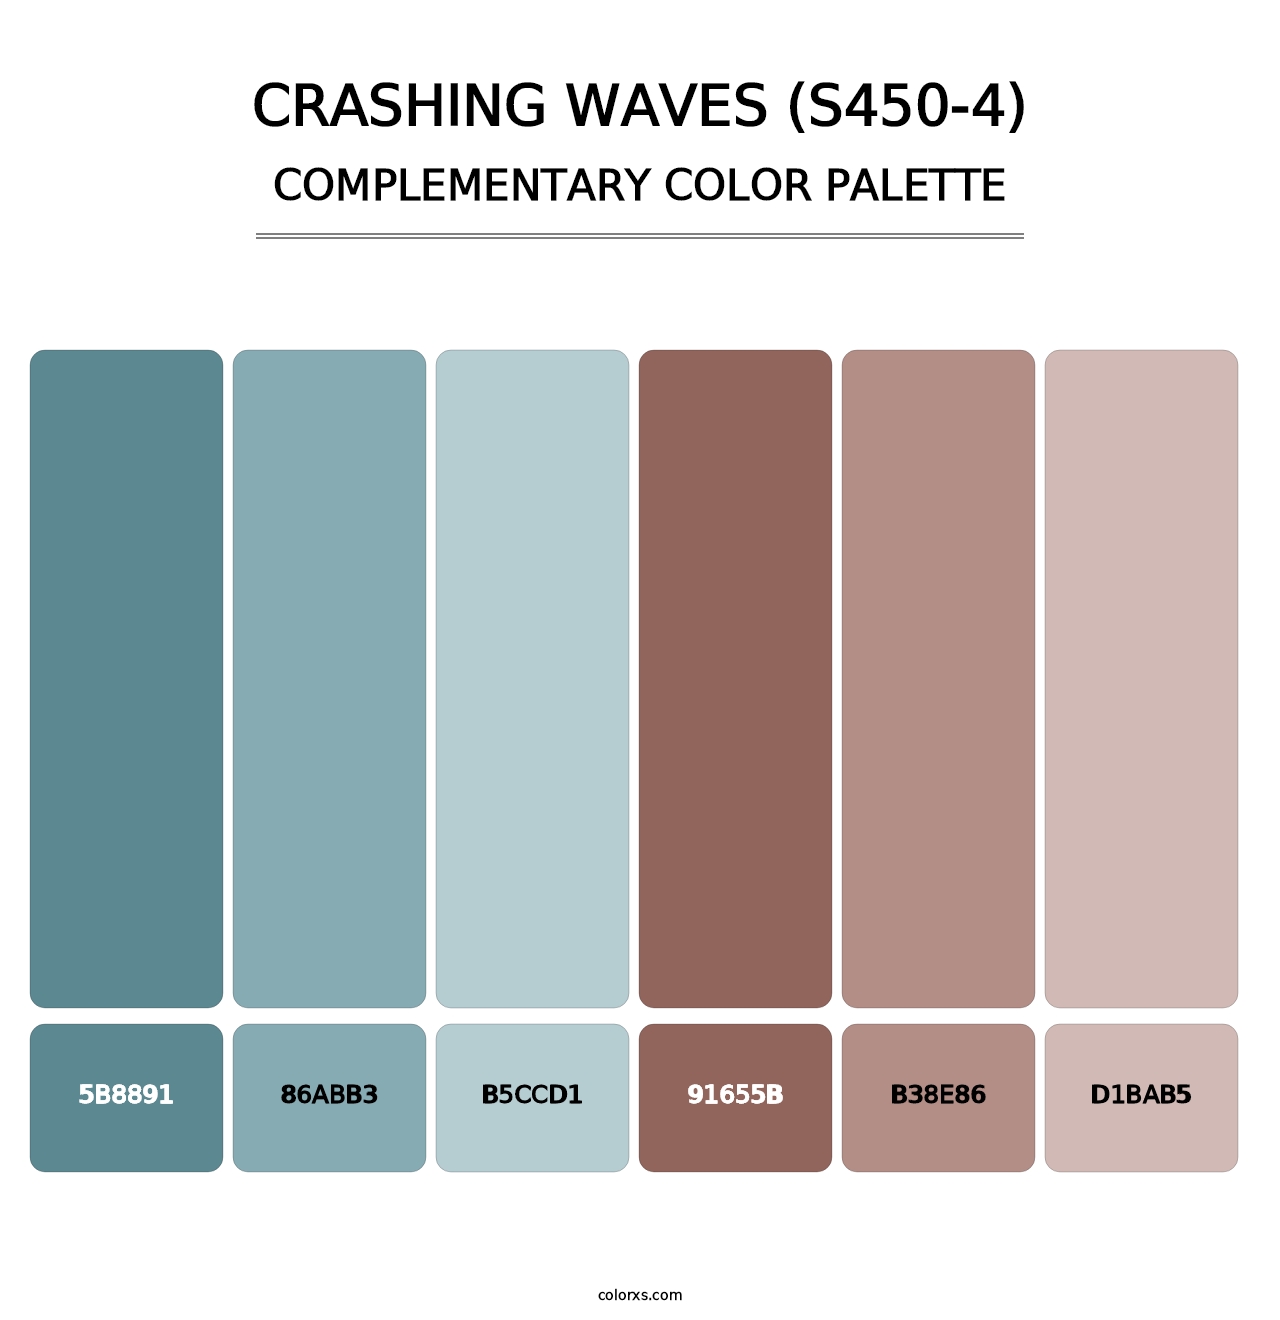 Crashing Waves (S450-4) - Complementary Color Palette